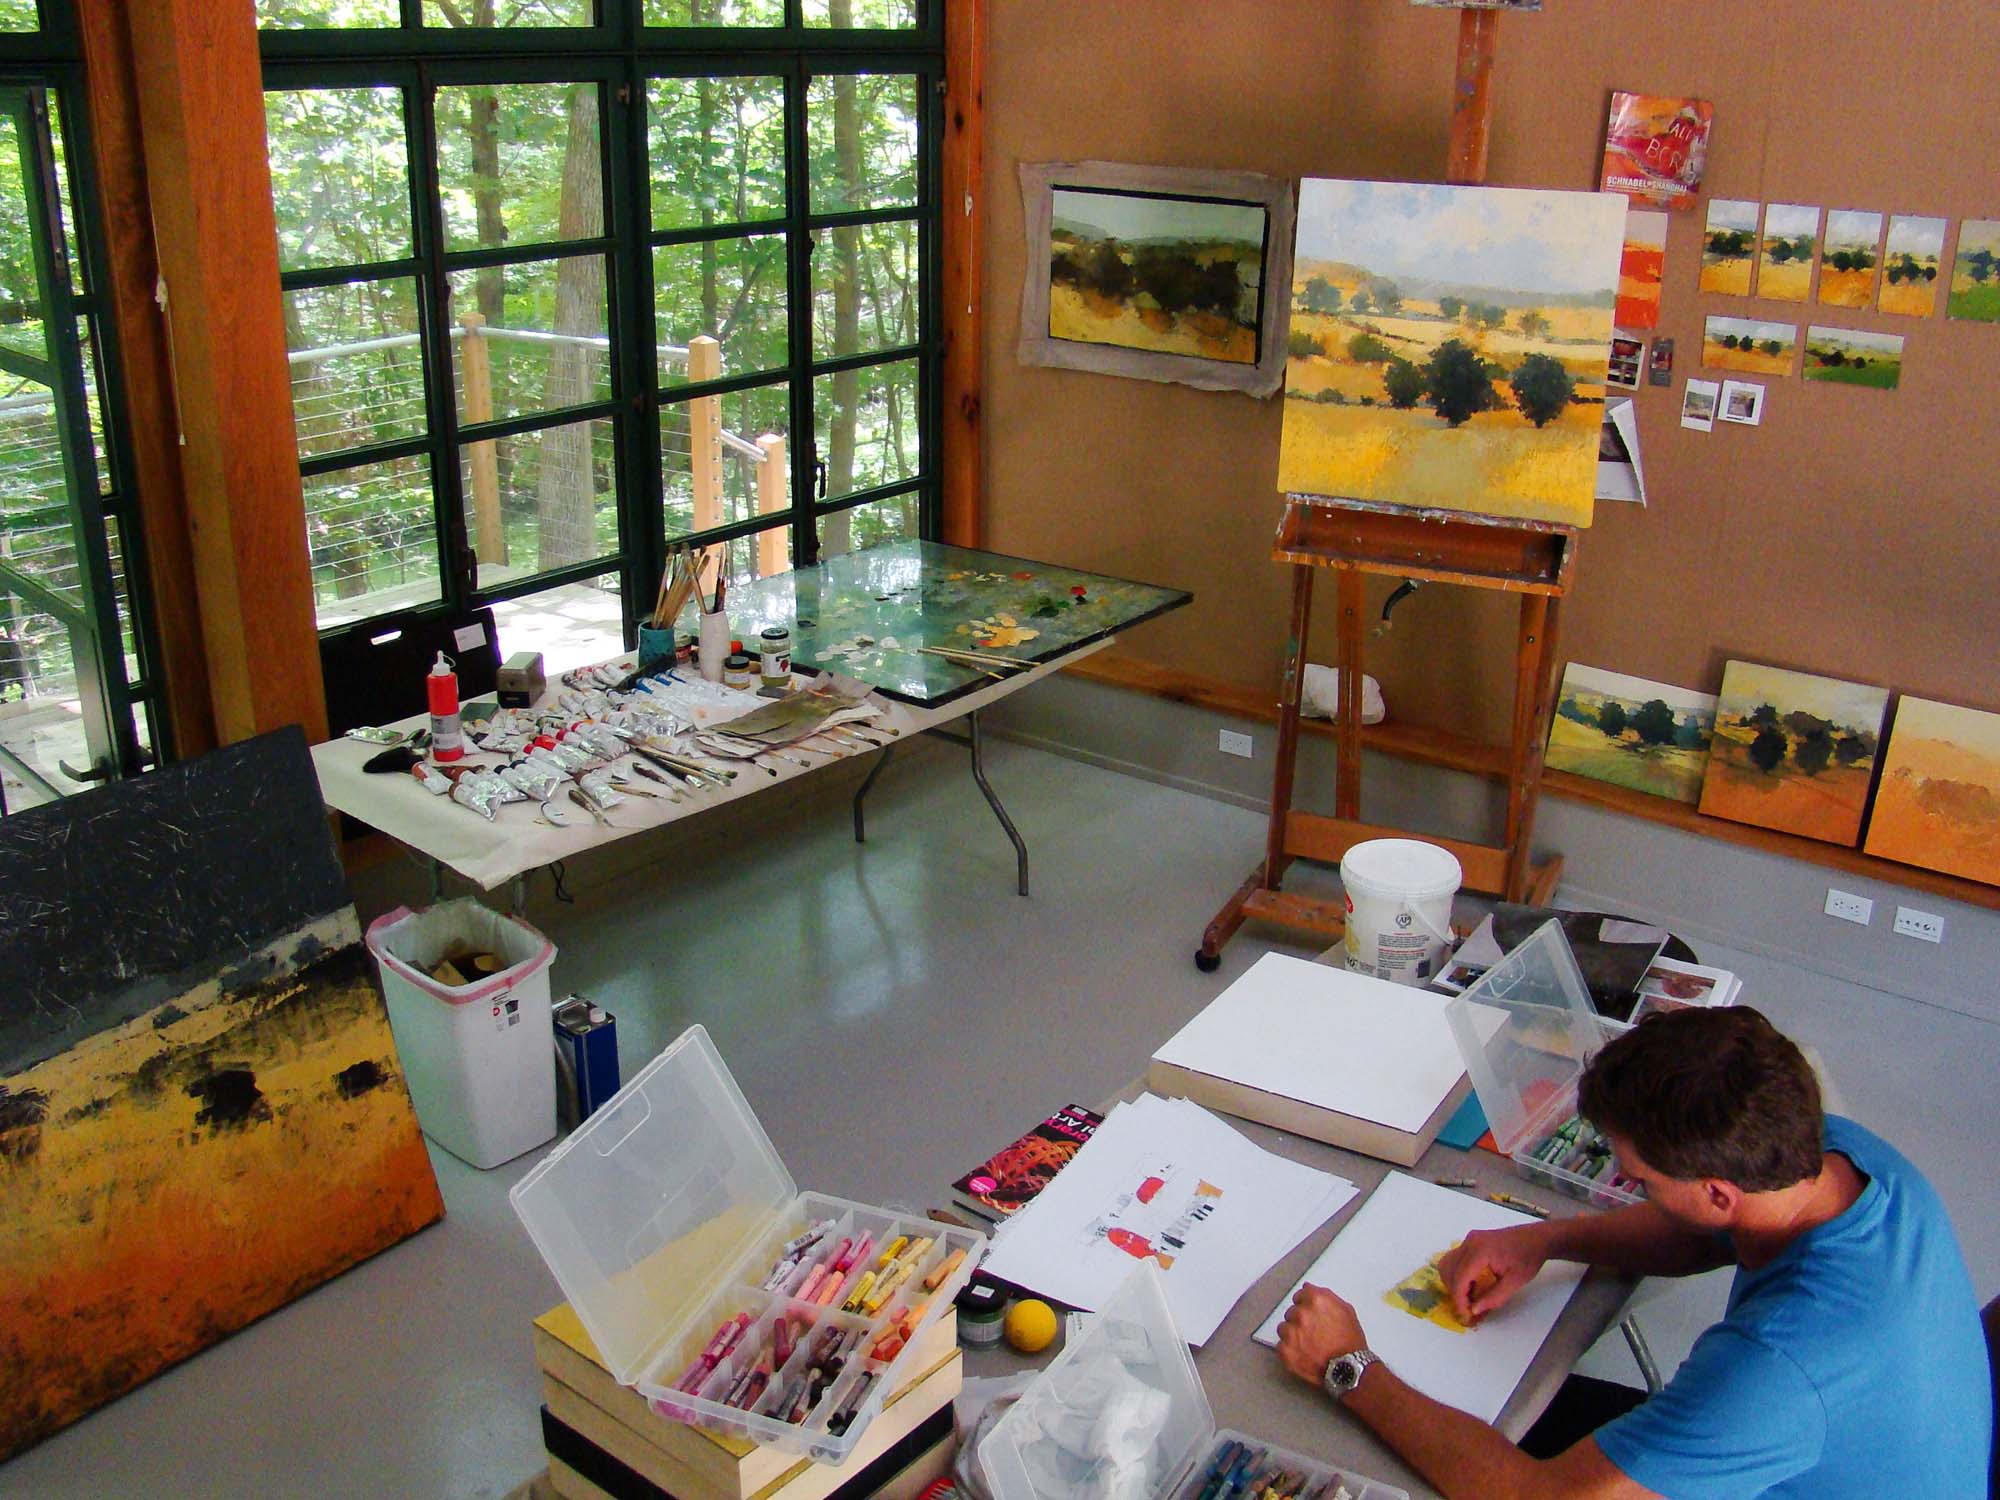 A modern art studio filled with paintings of landscapes. An artist sits on one side working on a drawing with pastels.